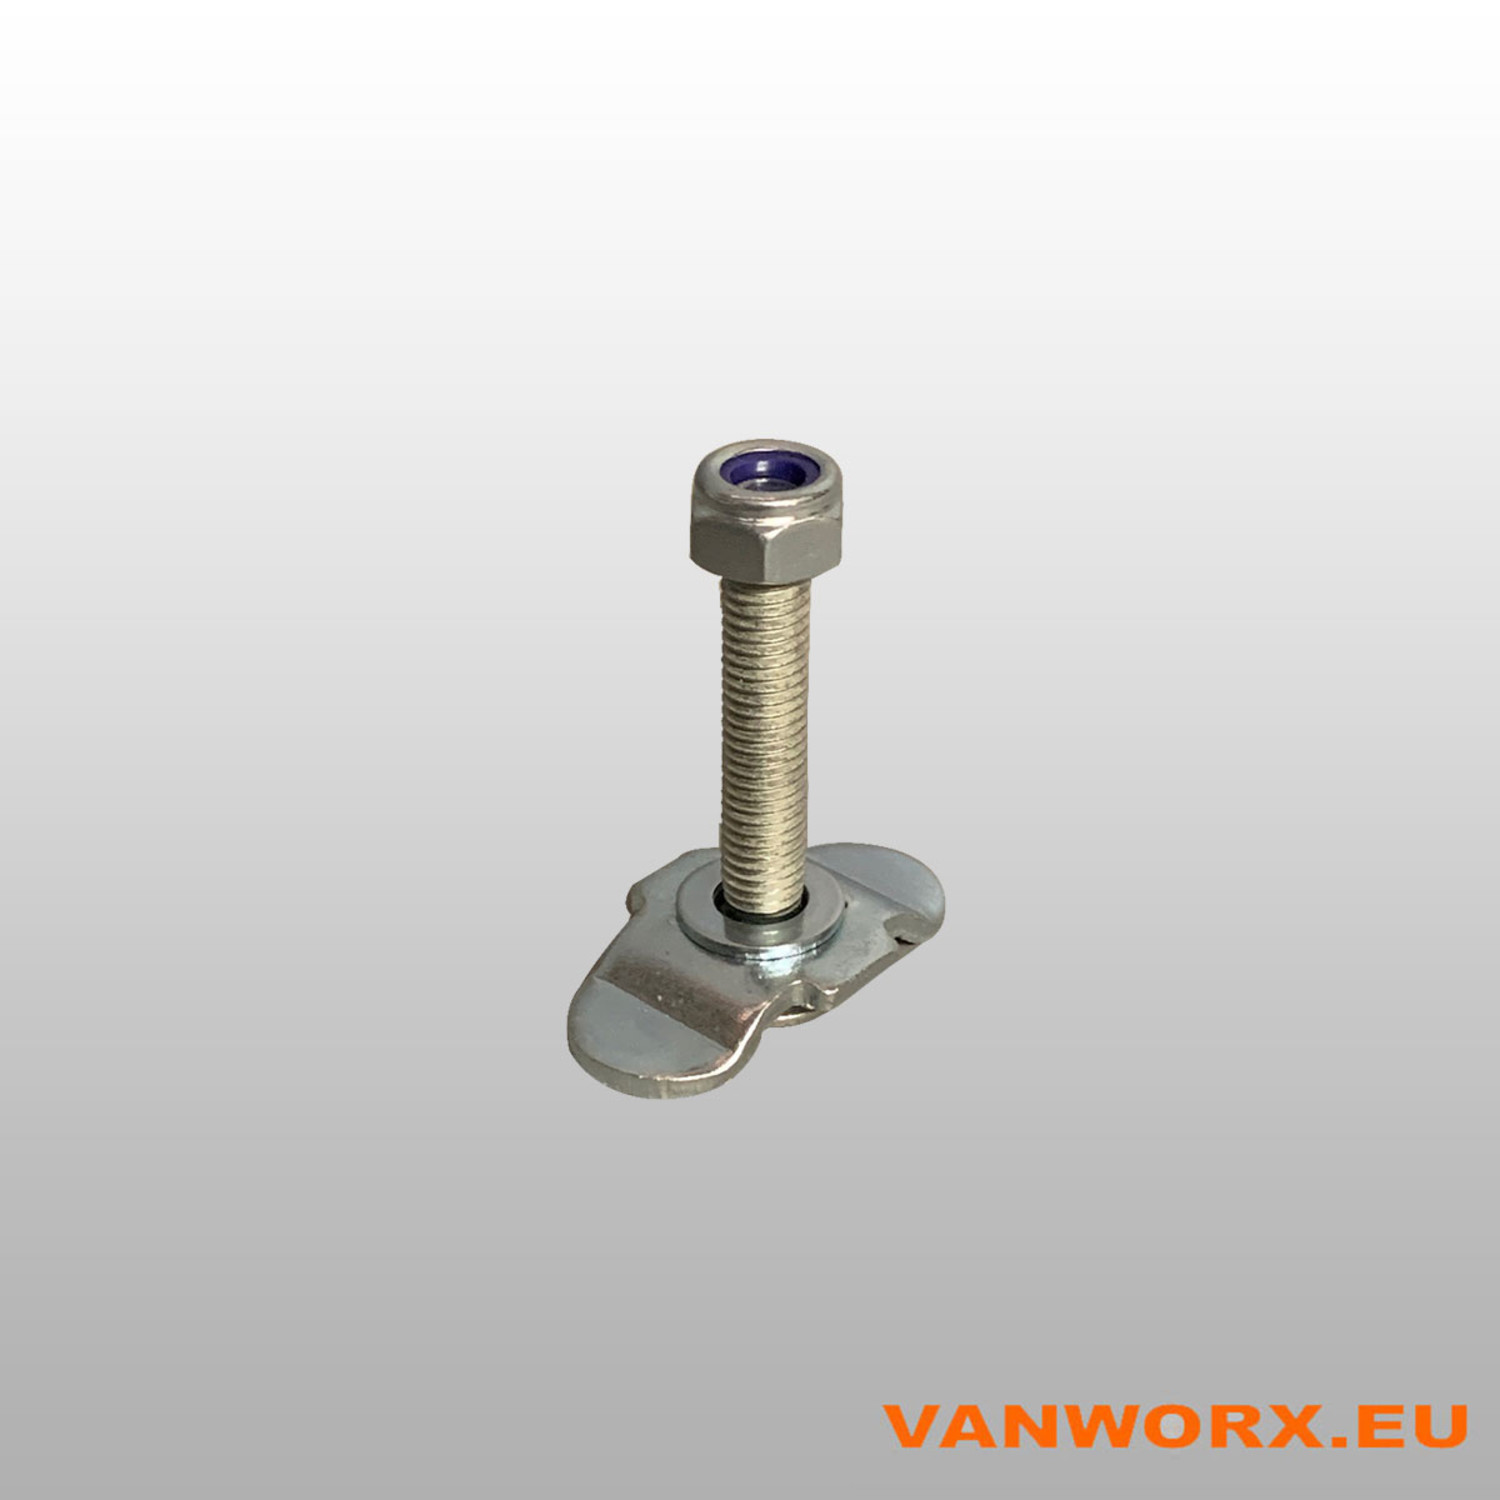 KERL Screw fitting for airline rails M8 